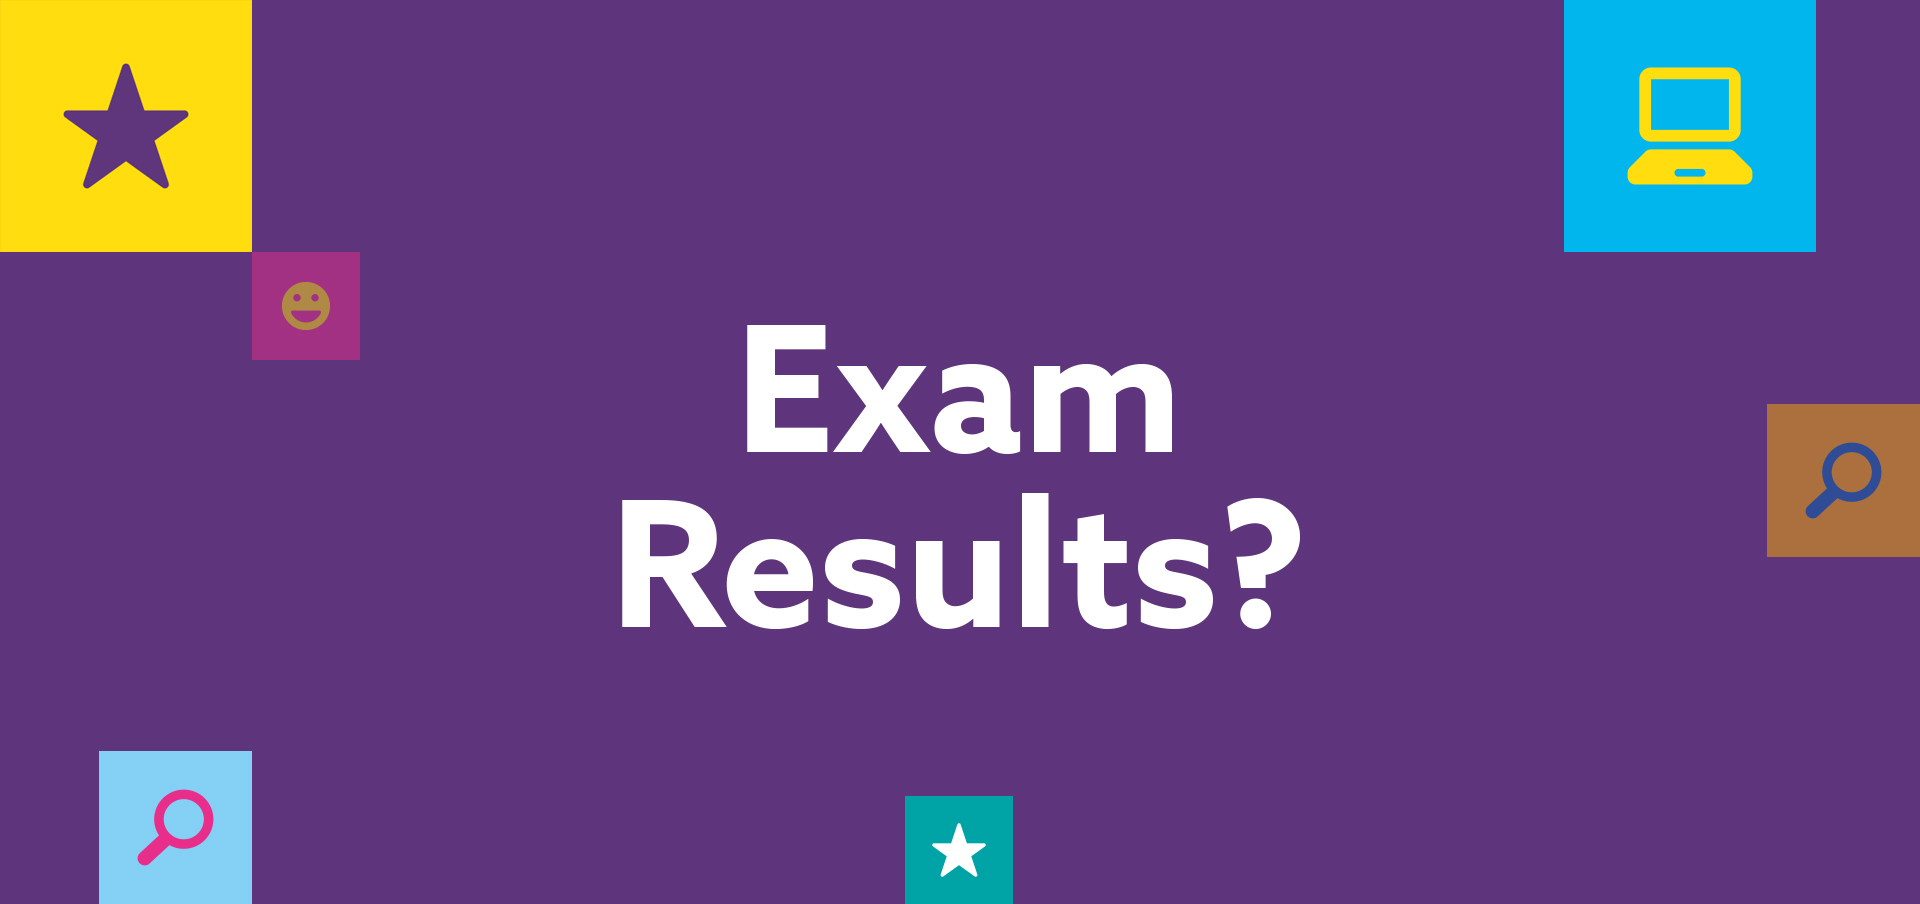 'Exam results?' title surrounded by emojis